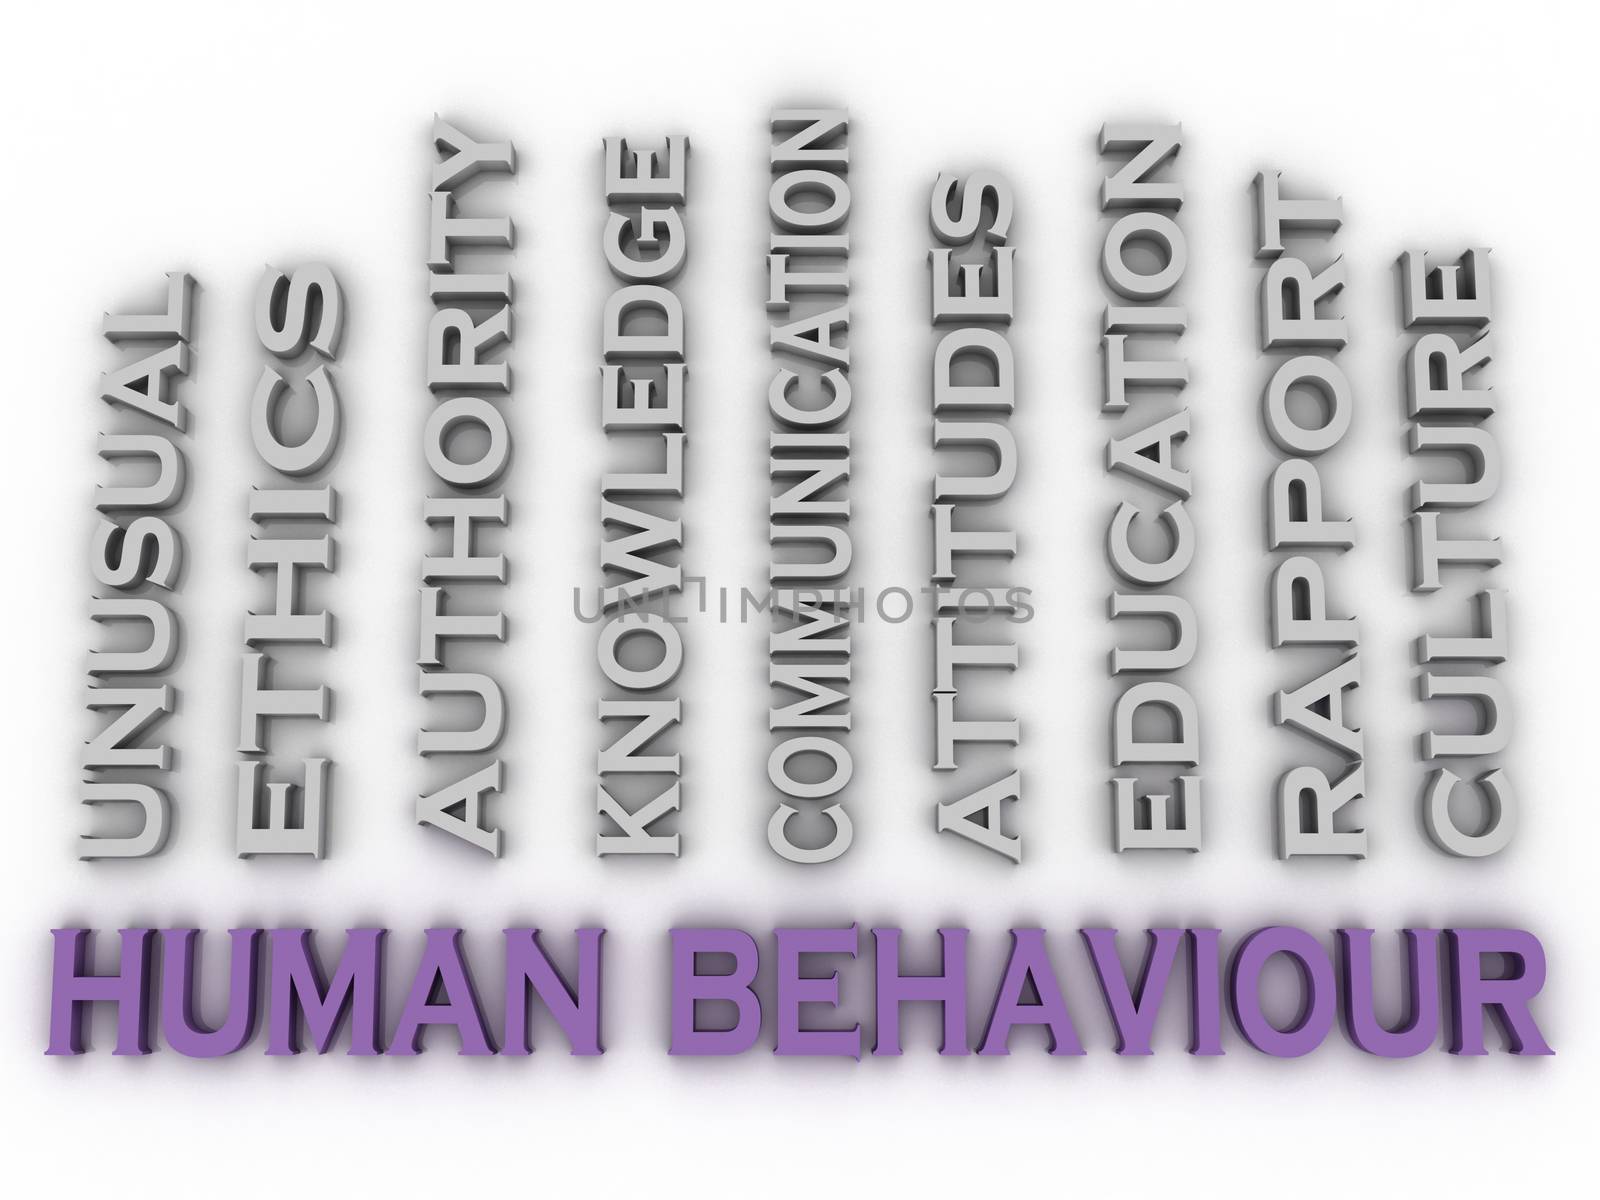 3d image Human behaviour issues concept word cloud background by dacasdo